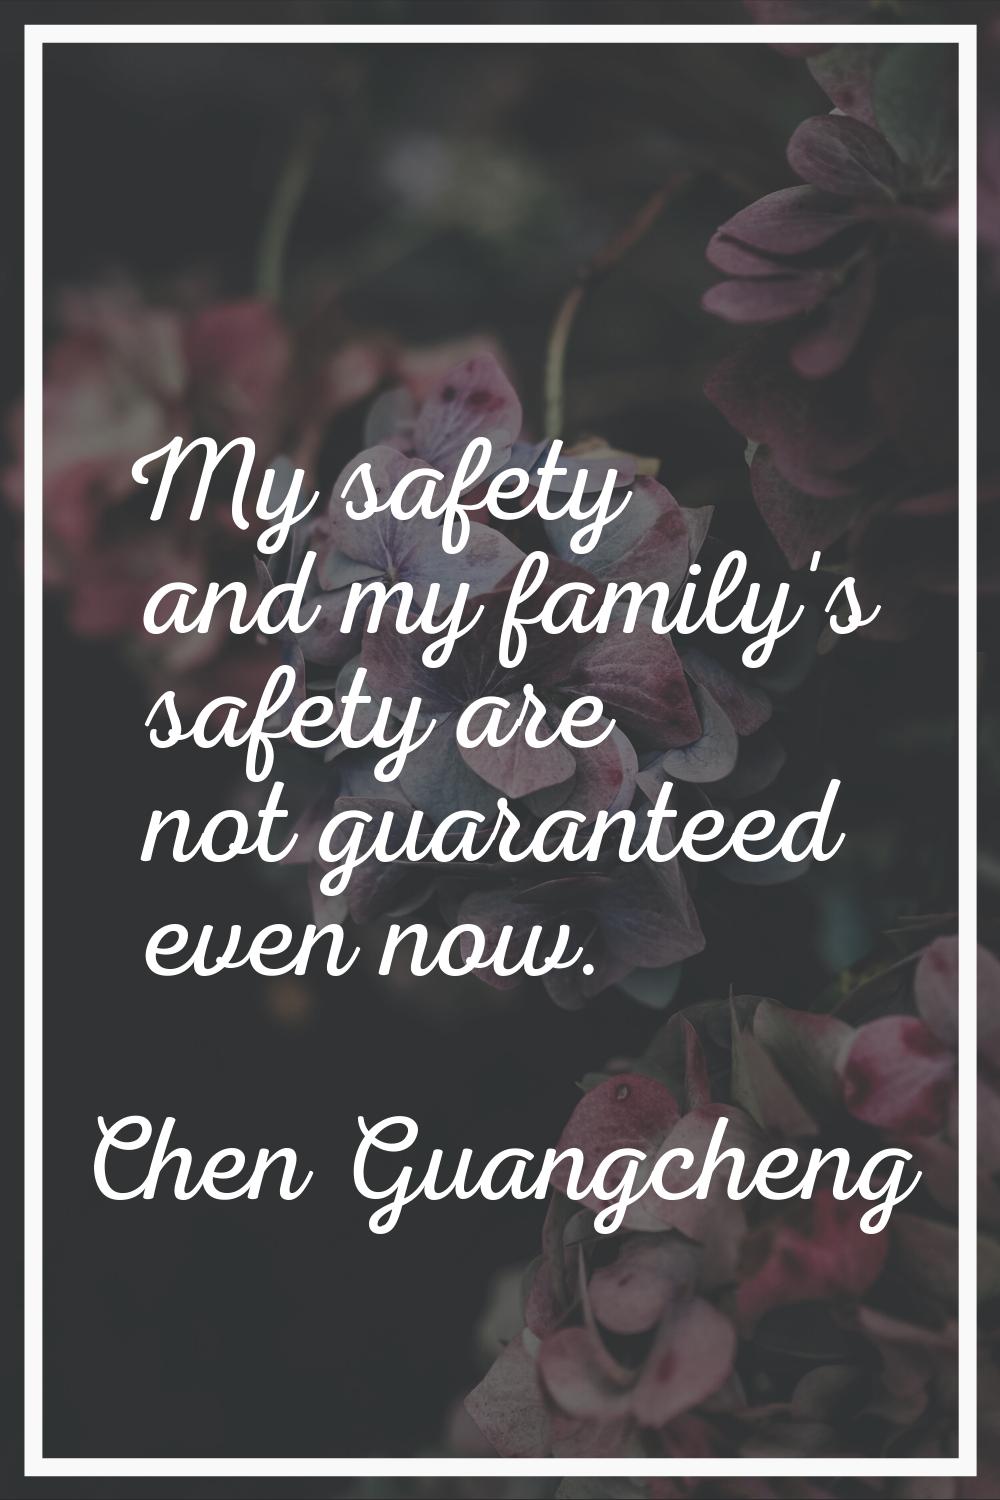 My safety and my family's safety are not guaranteed even now.